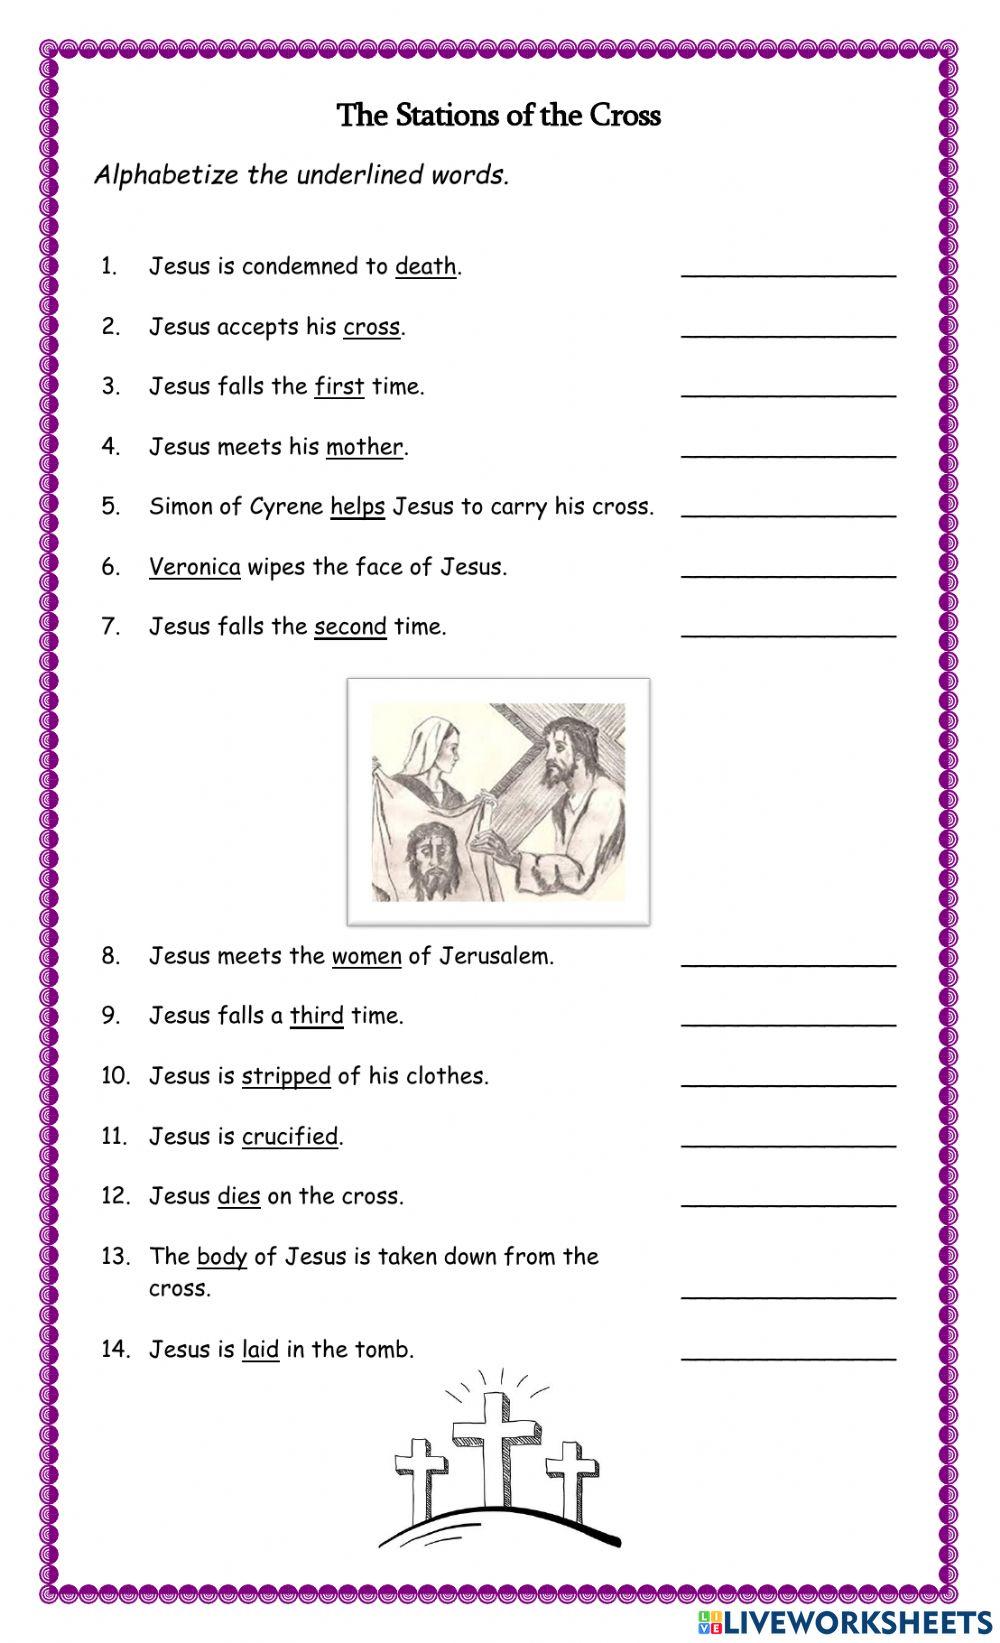 Alphabetization: The Stations of the Cross